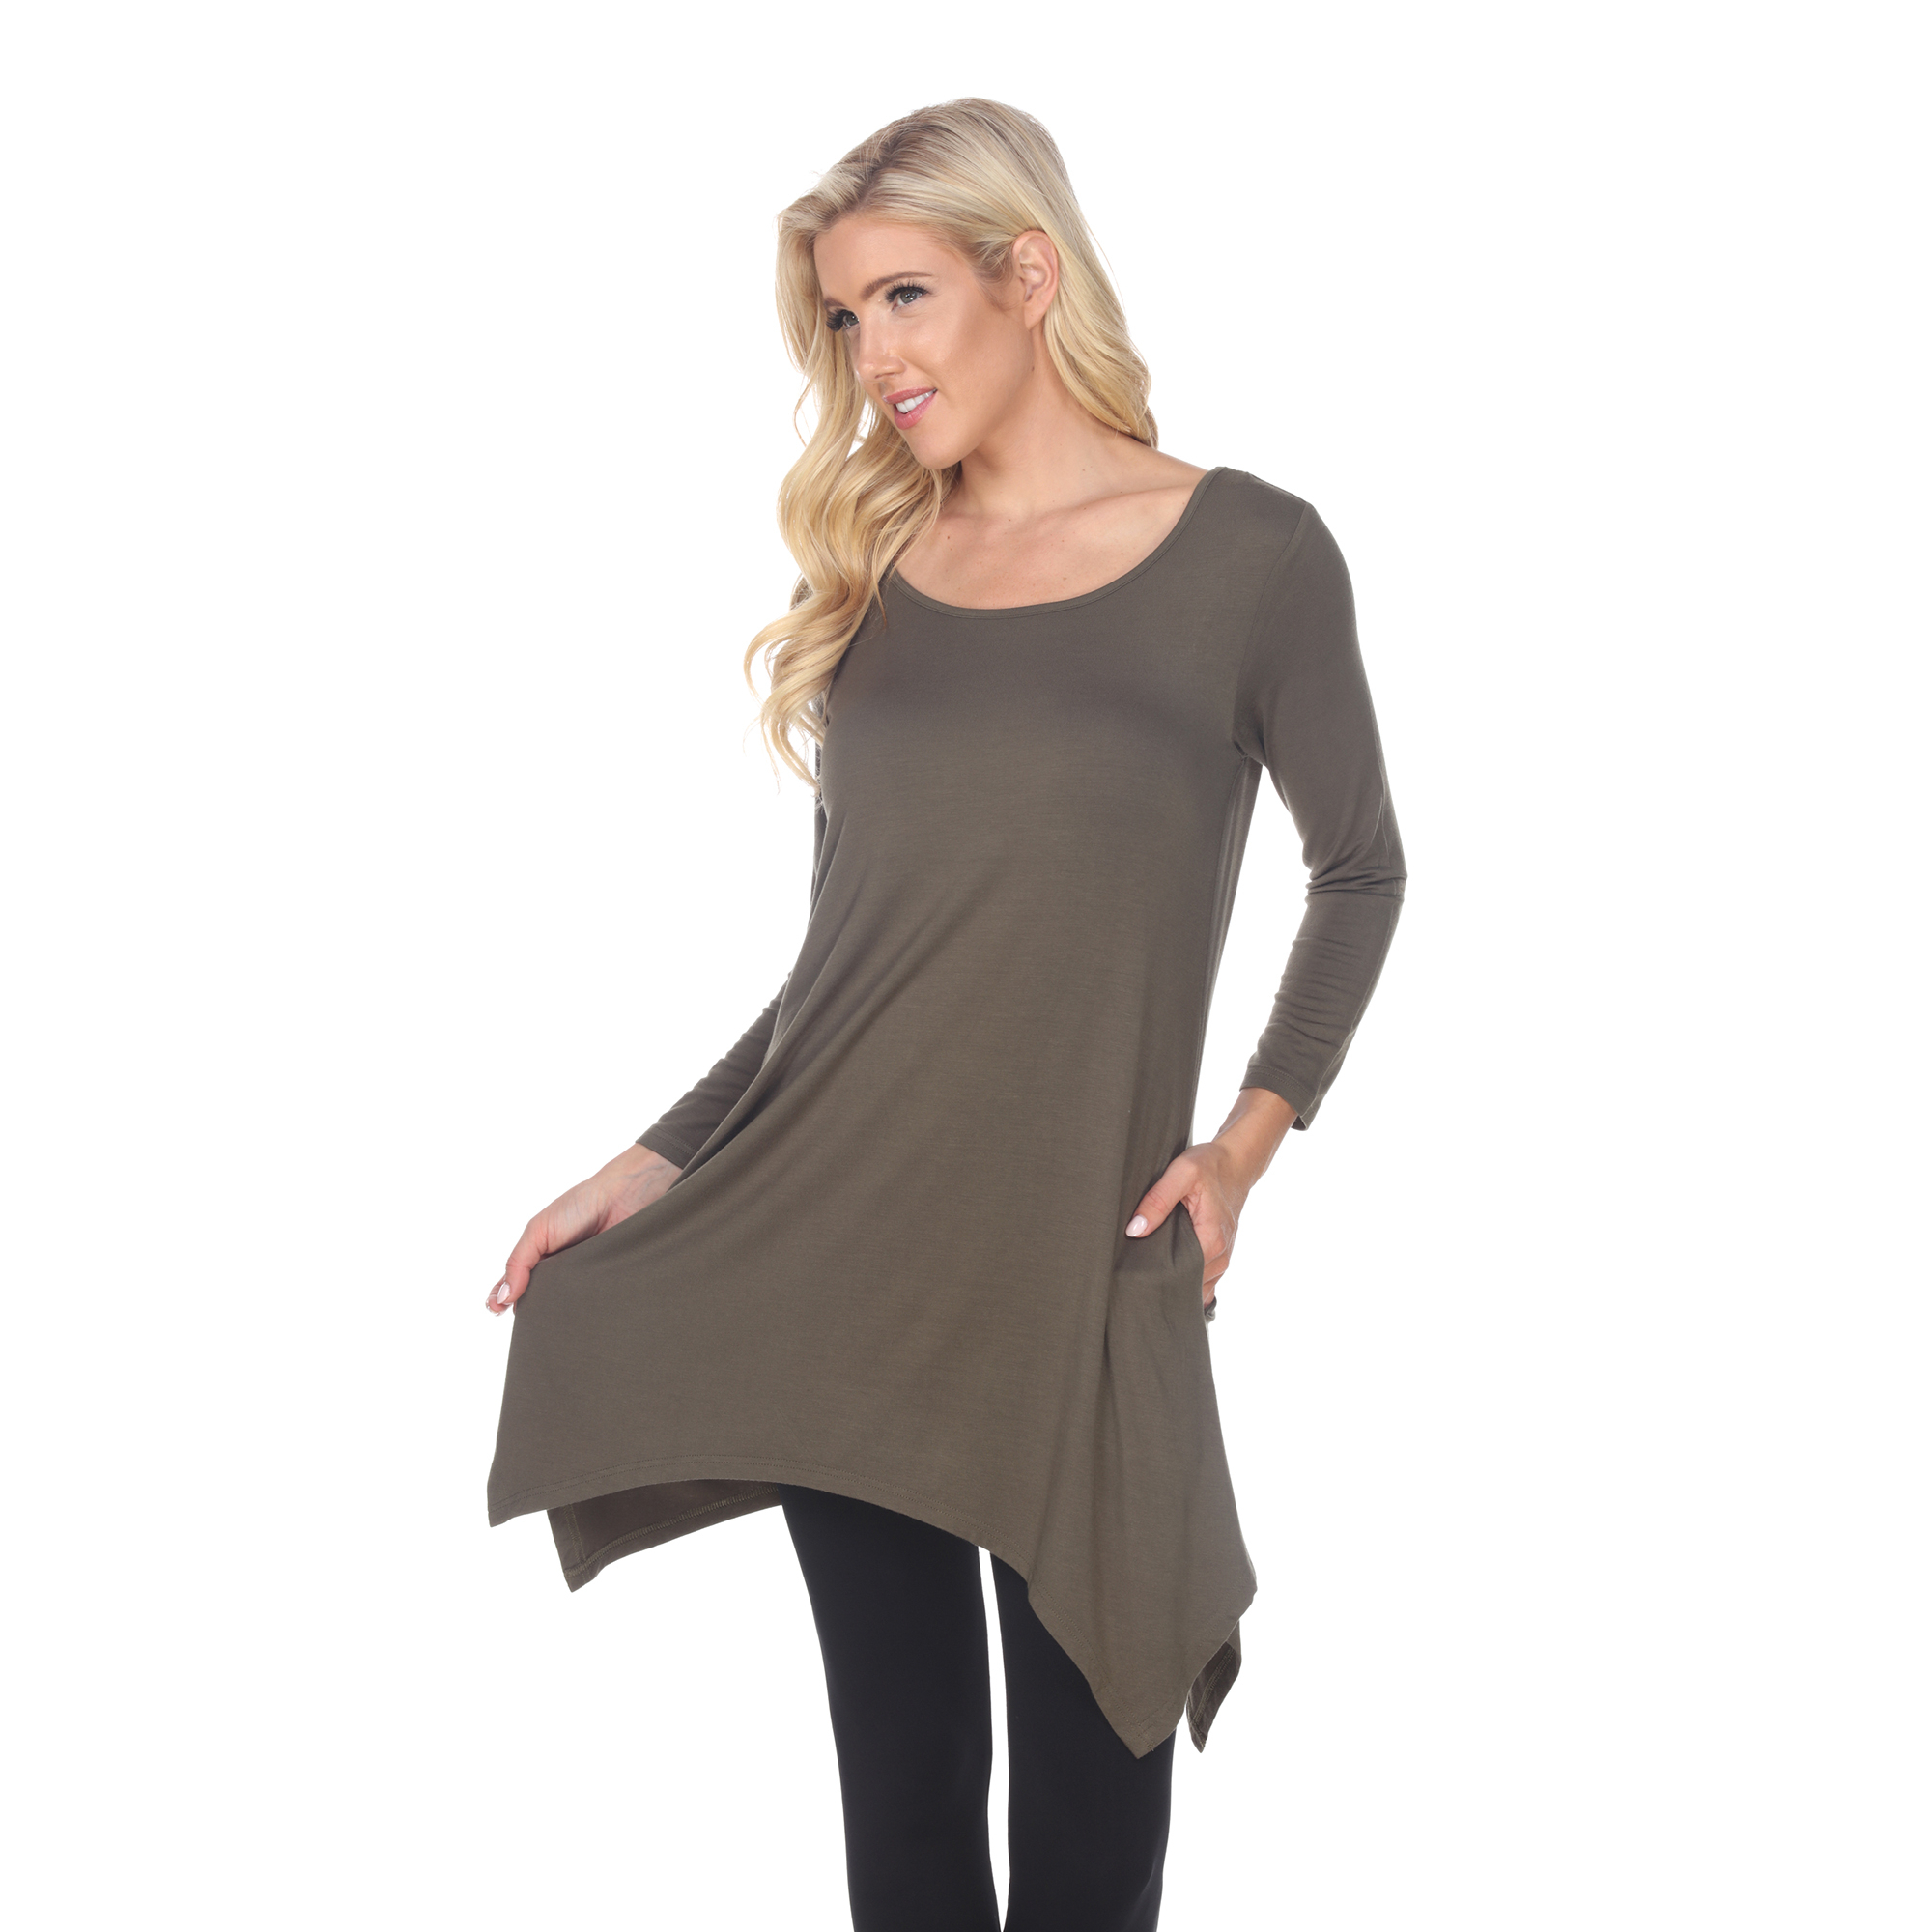 White Mark Women's Quarter Sleeve Tunic Top With Pockets - Olive, 5X